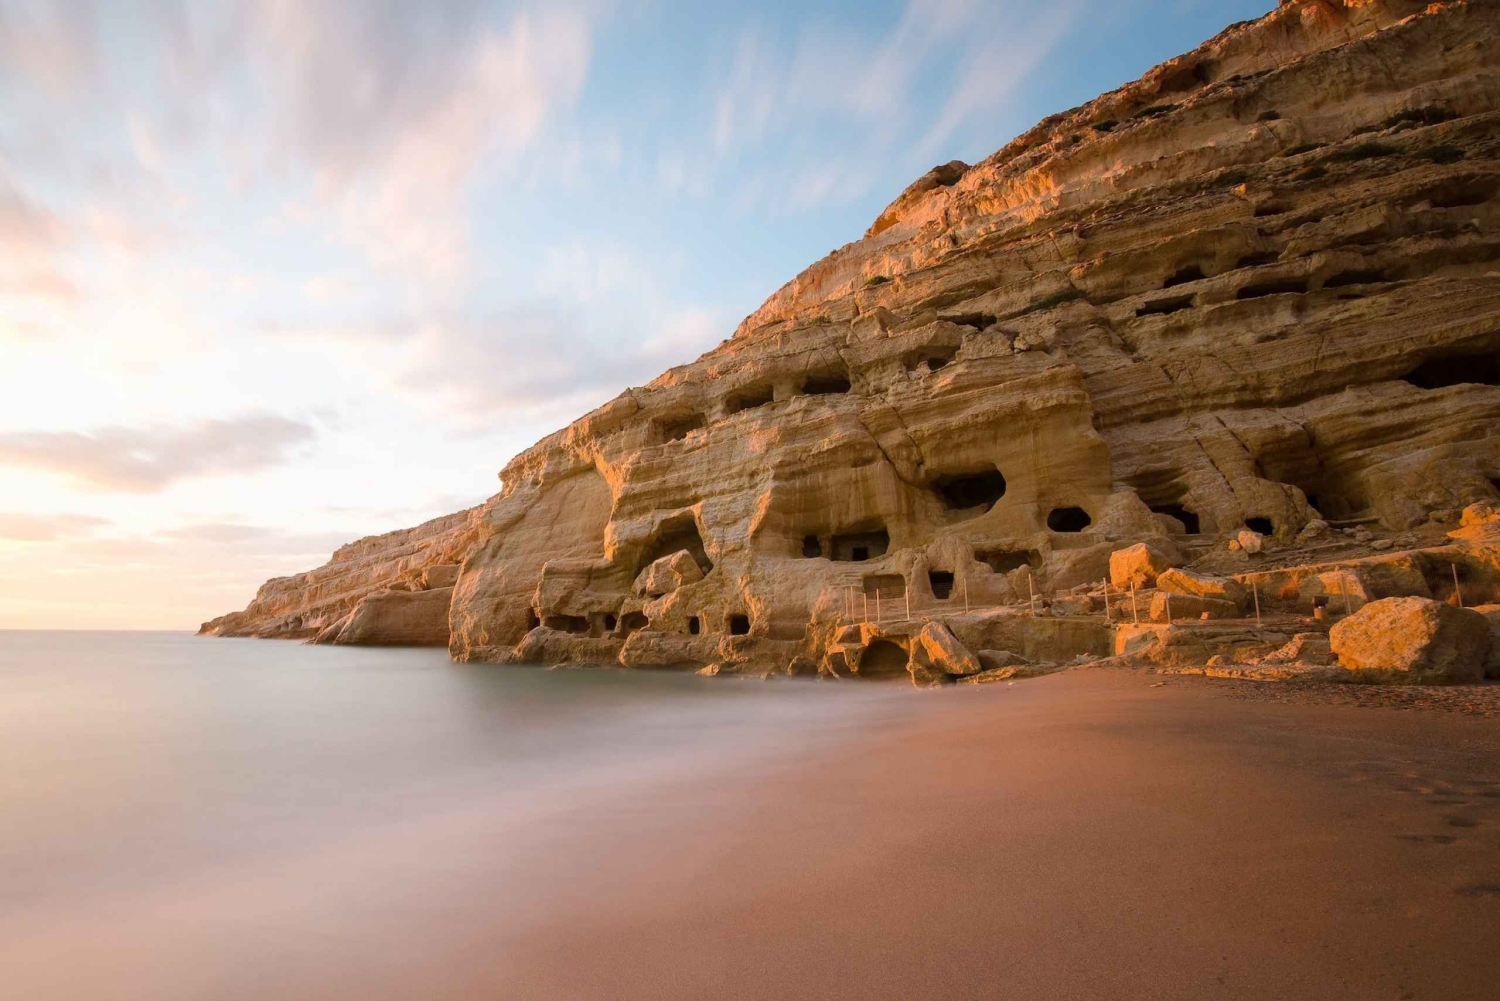 From Heraklion: Matala Beach and Hippie caves